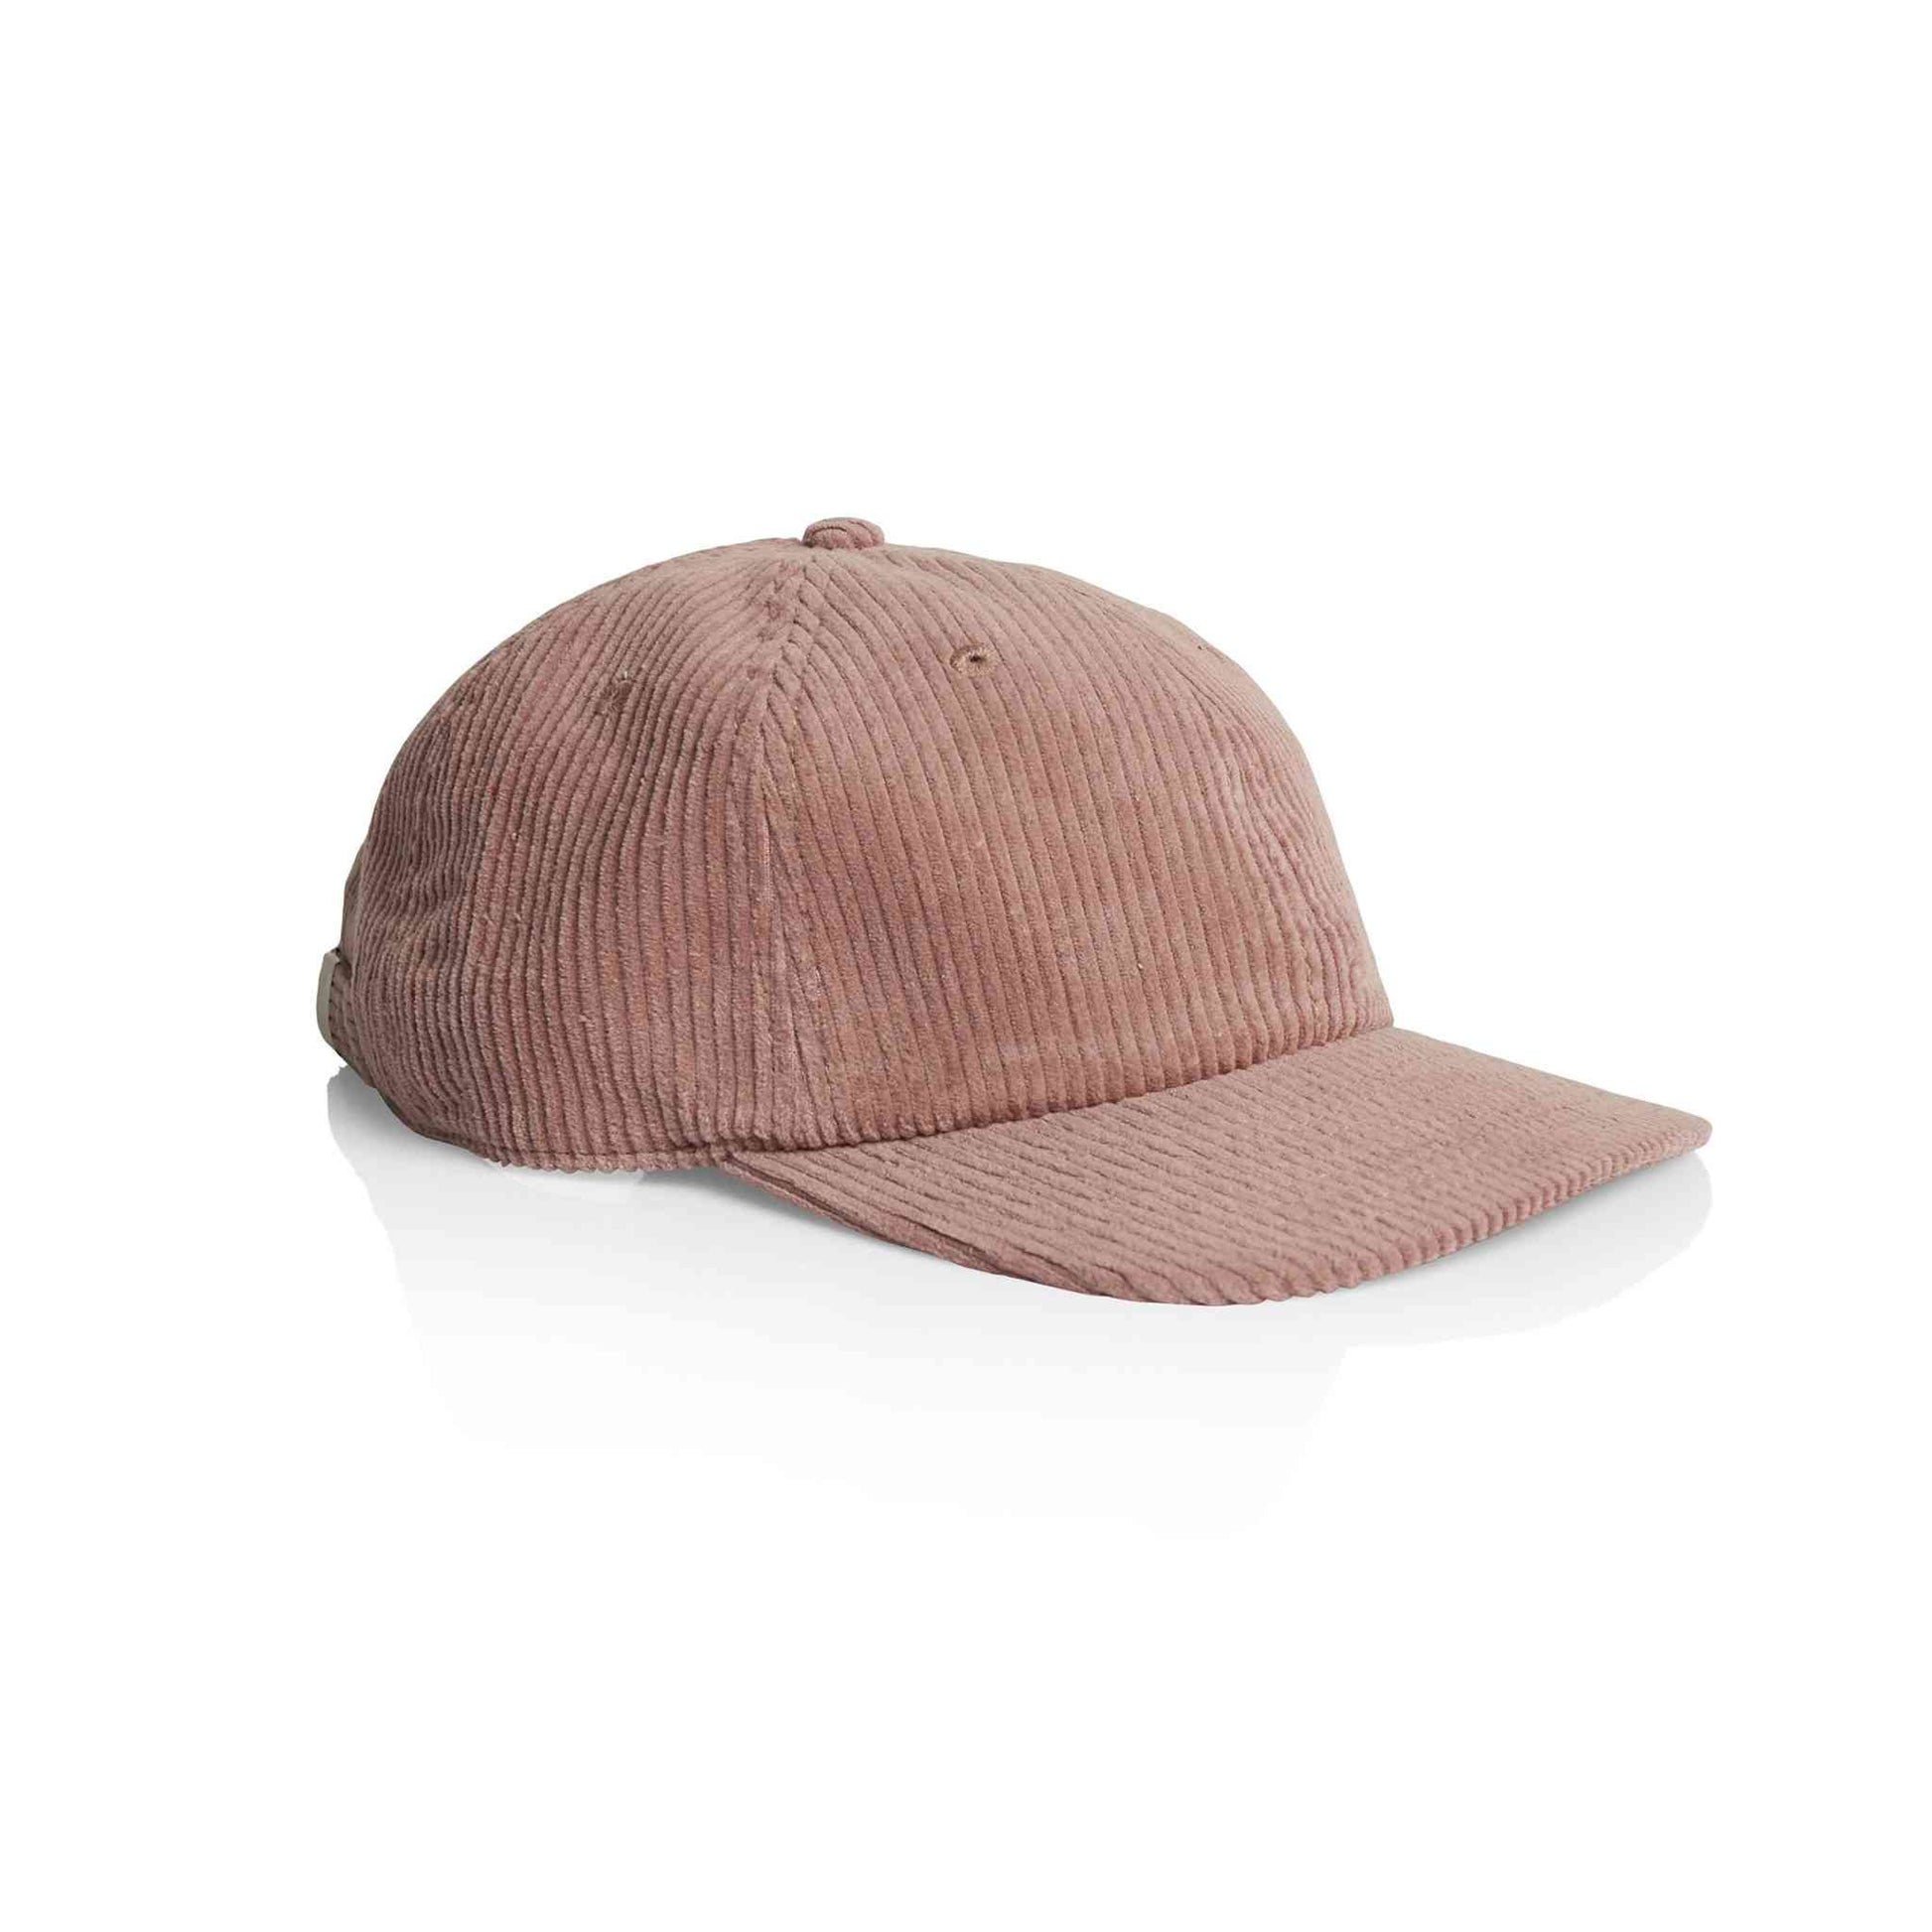 AS Colour 1152 Class 6 panel cord cap in hazy pink colour, side view